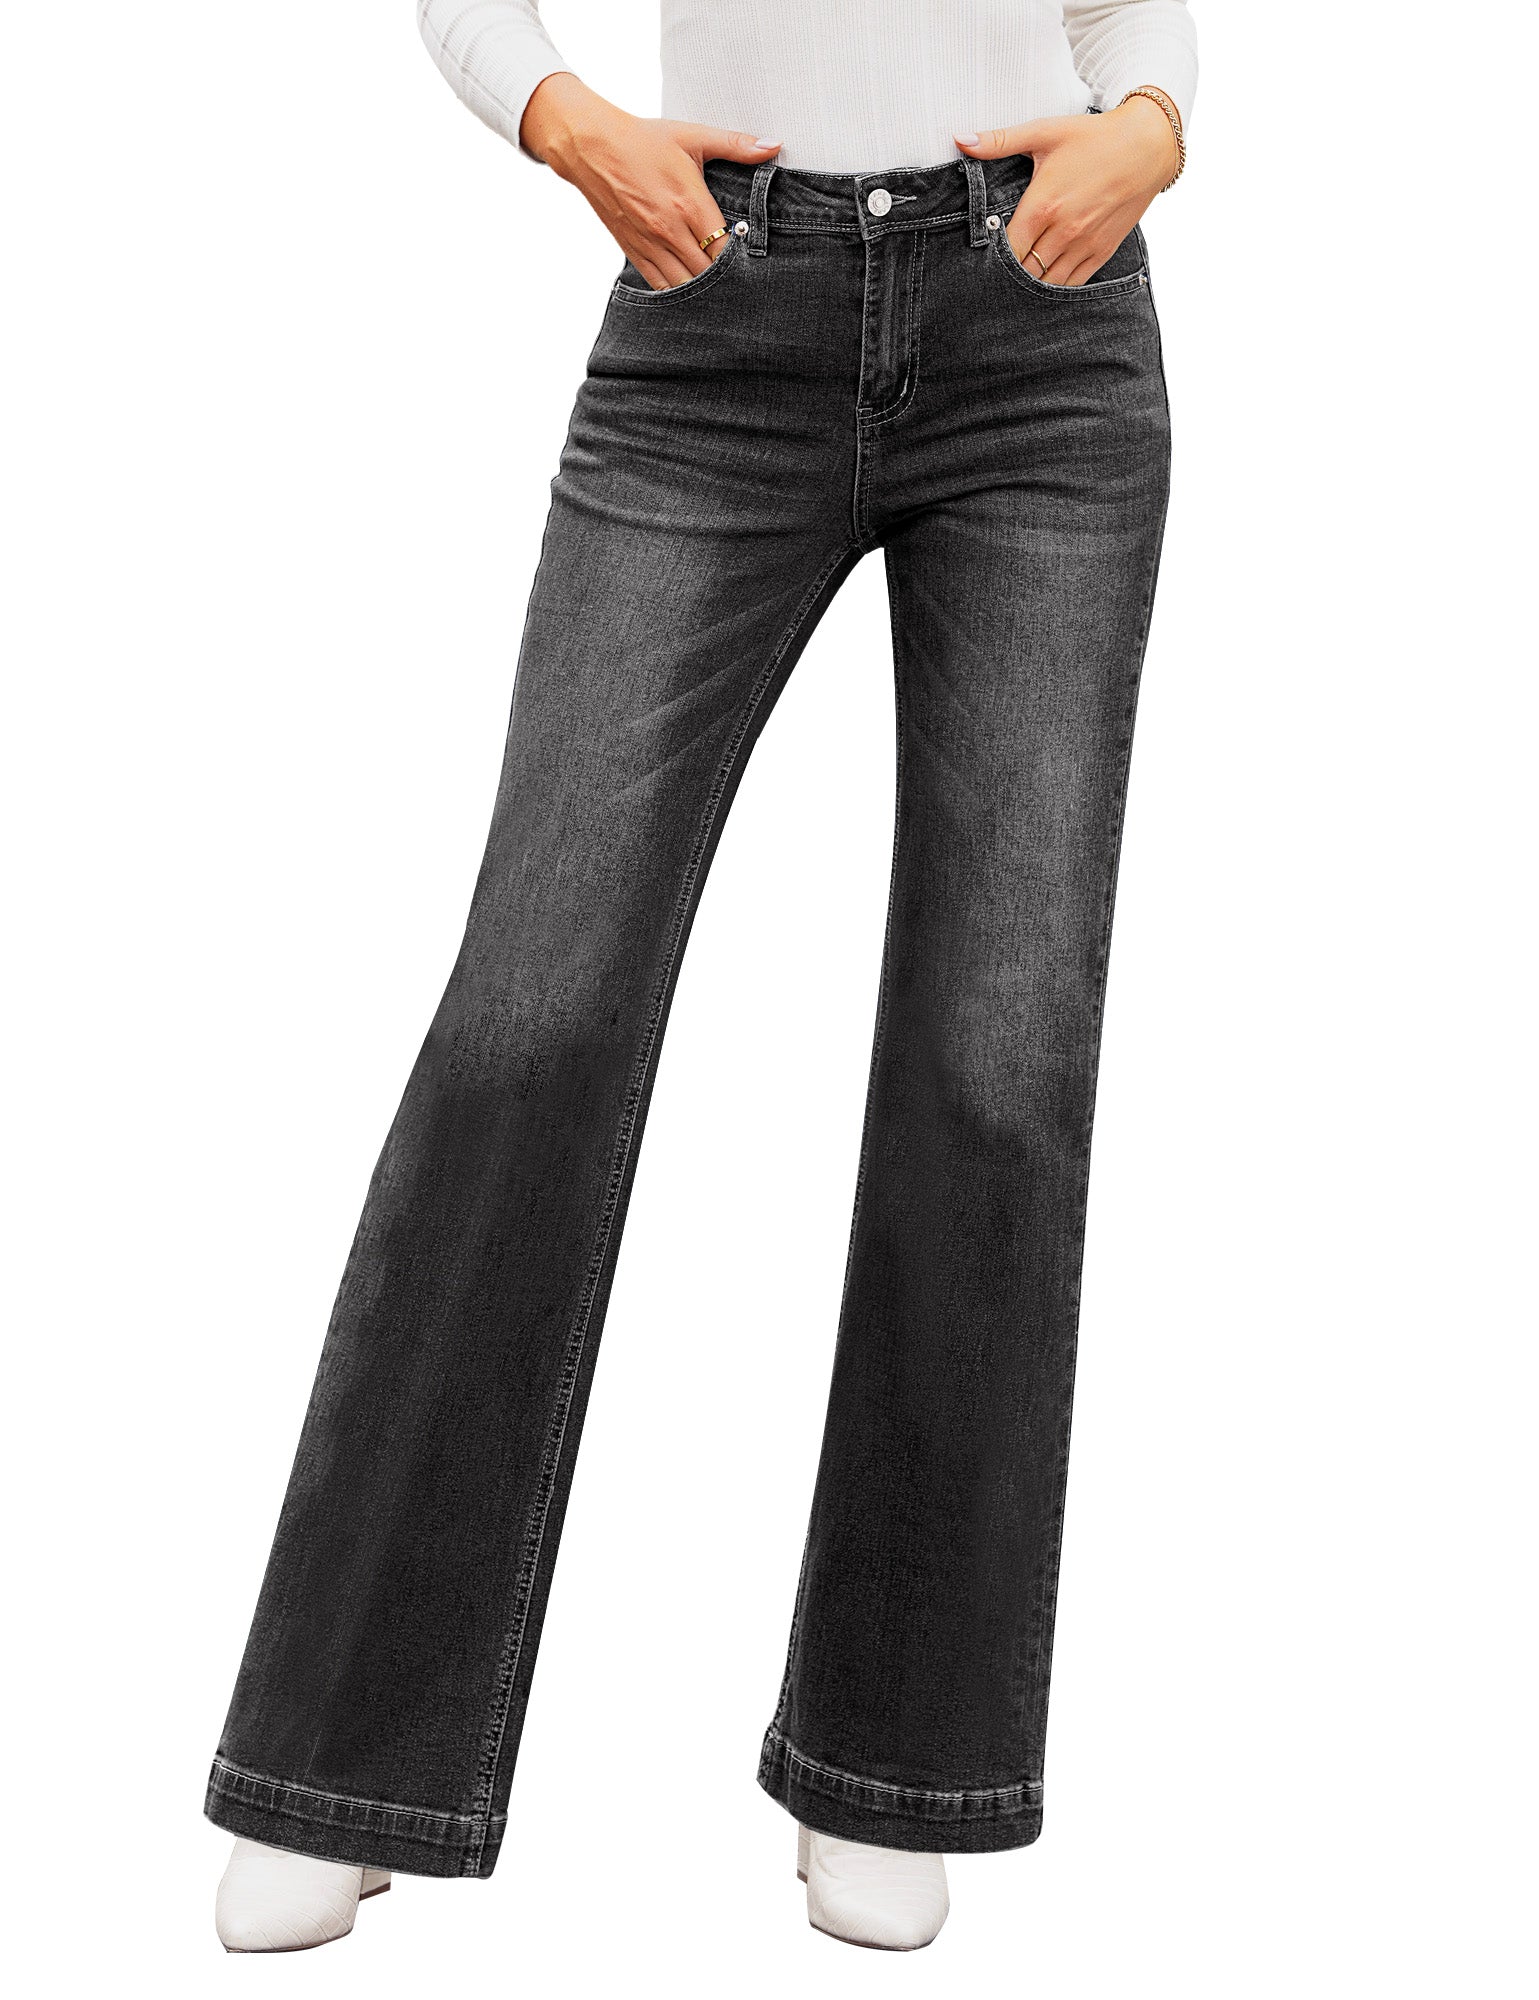 GRAPENT Capris Jeans for Women High Waisted Stretchy Ripped Skinny Den –  Grapent